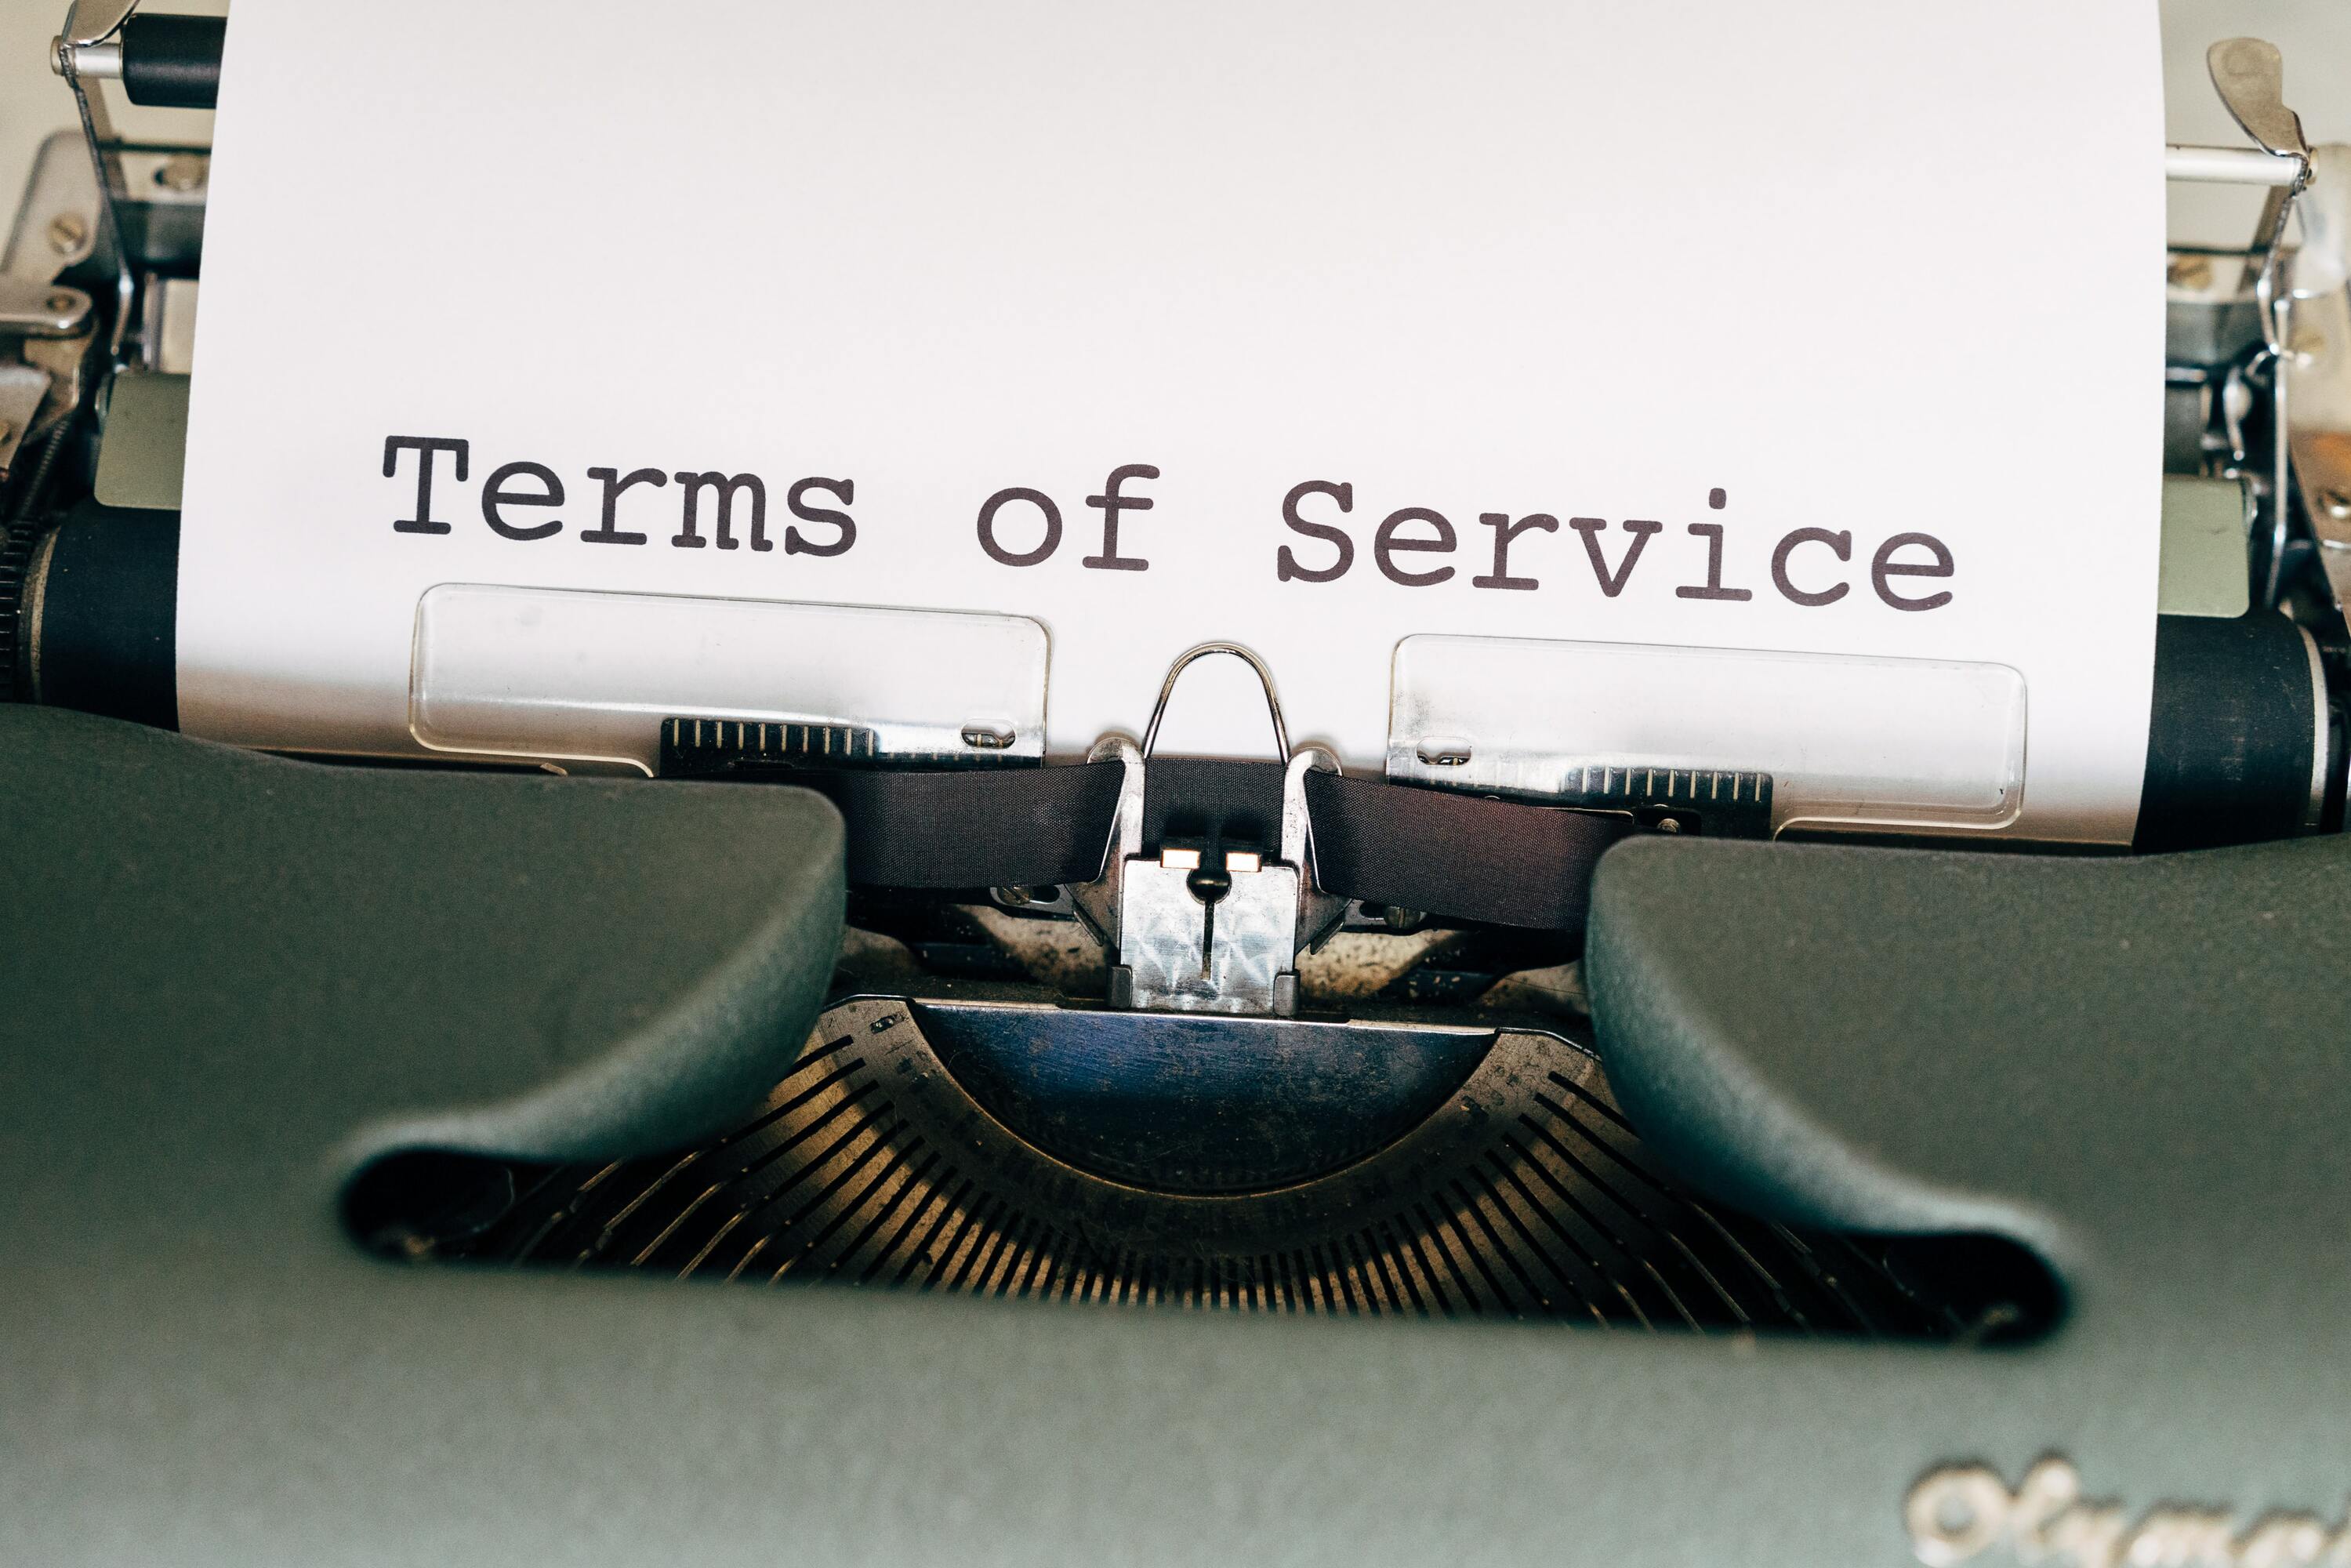 Term of Service written on a paper